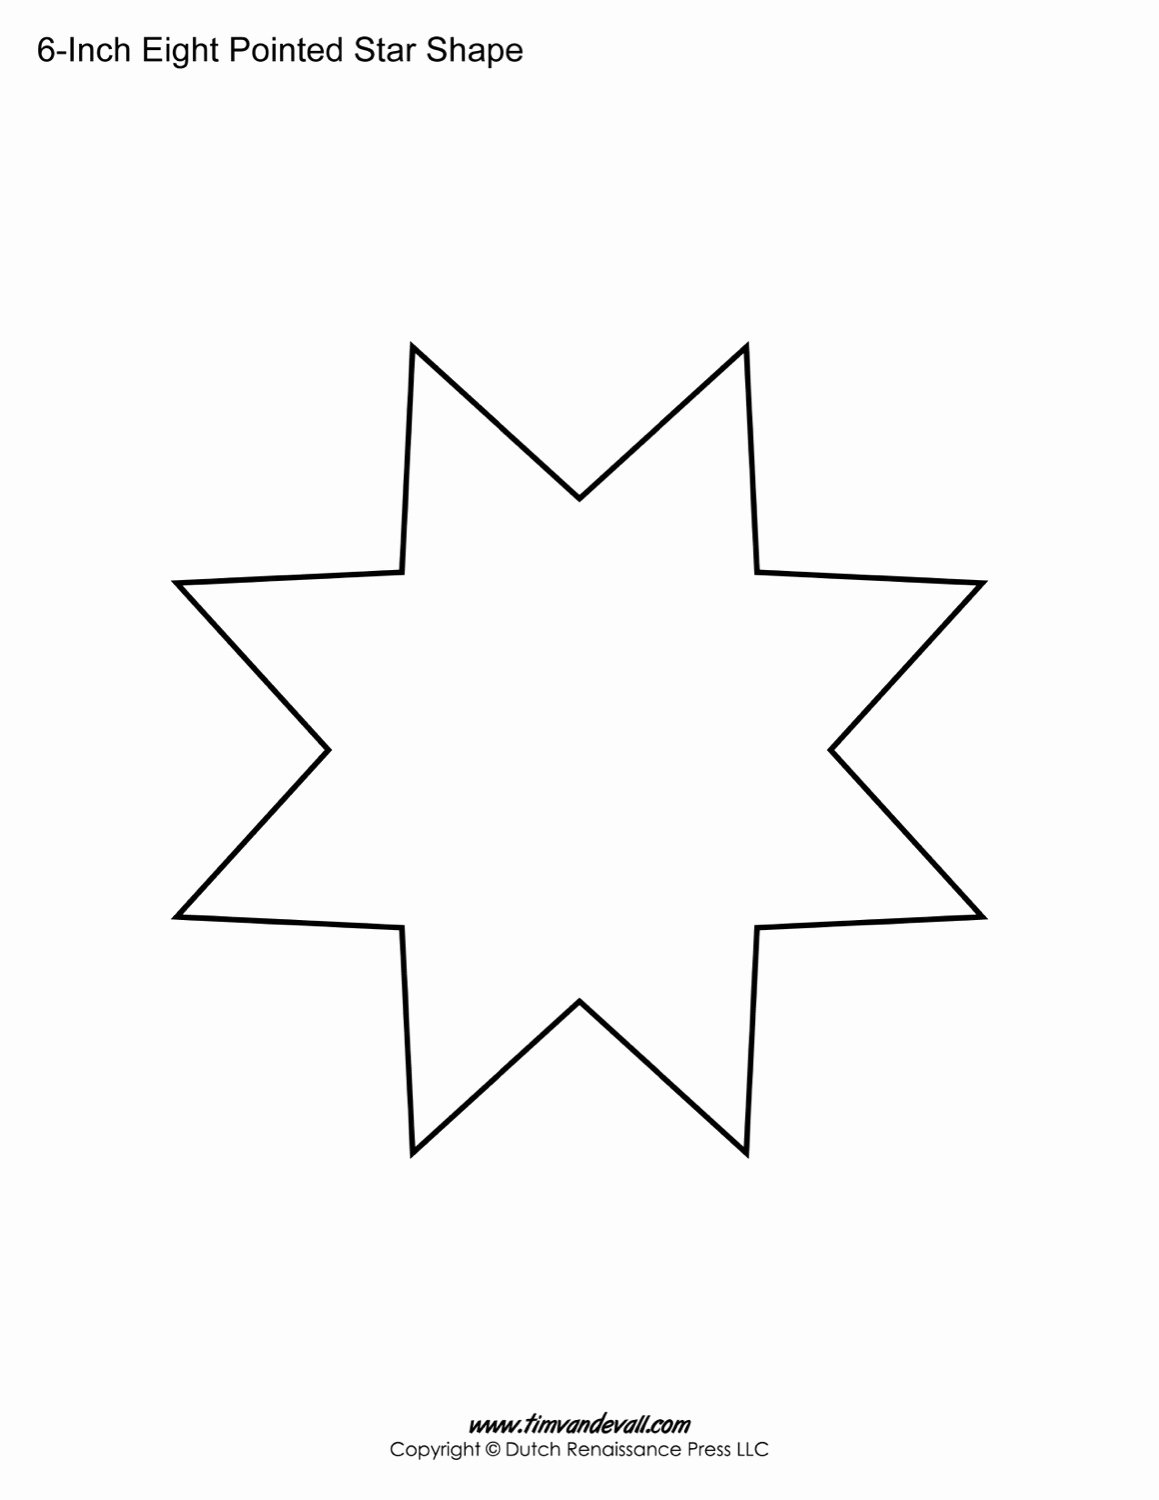 8 Point Star Template Printable New Free Eight Pointed Star Shapes